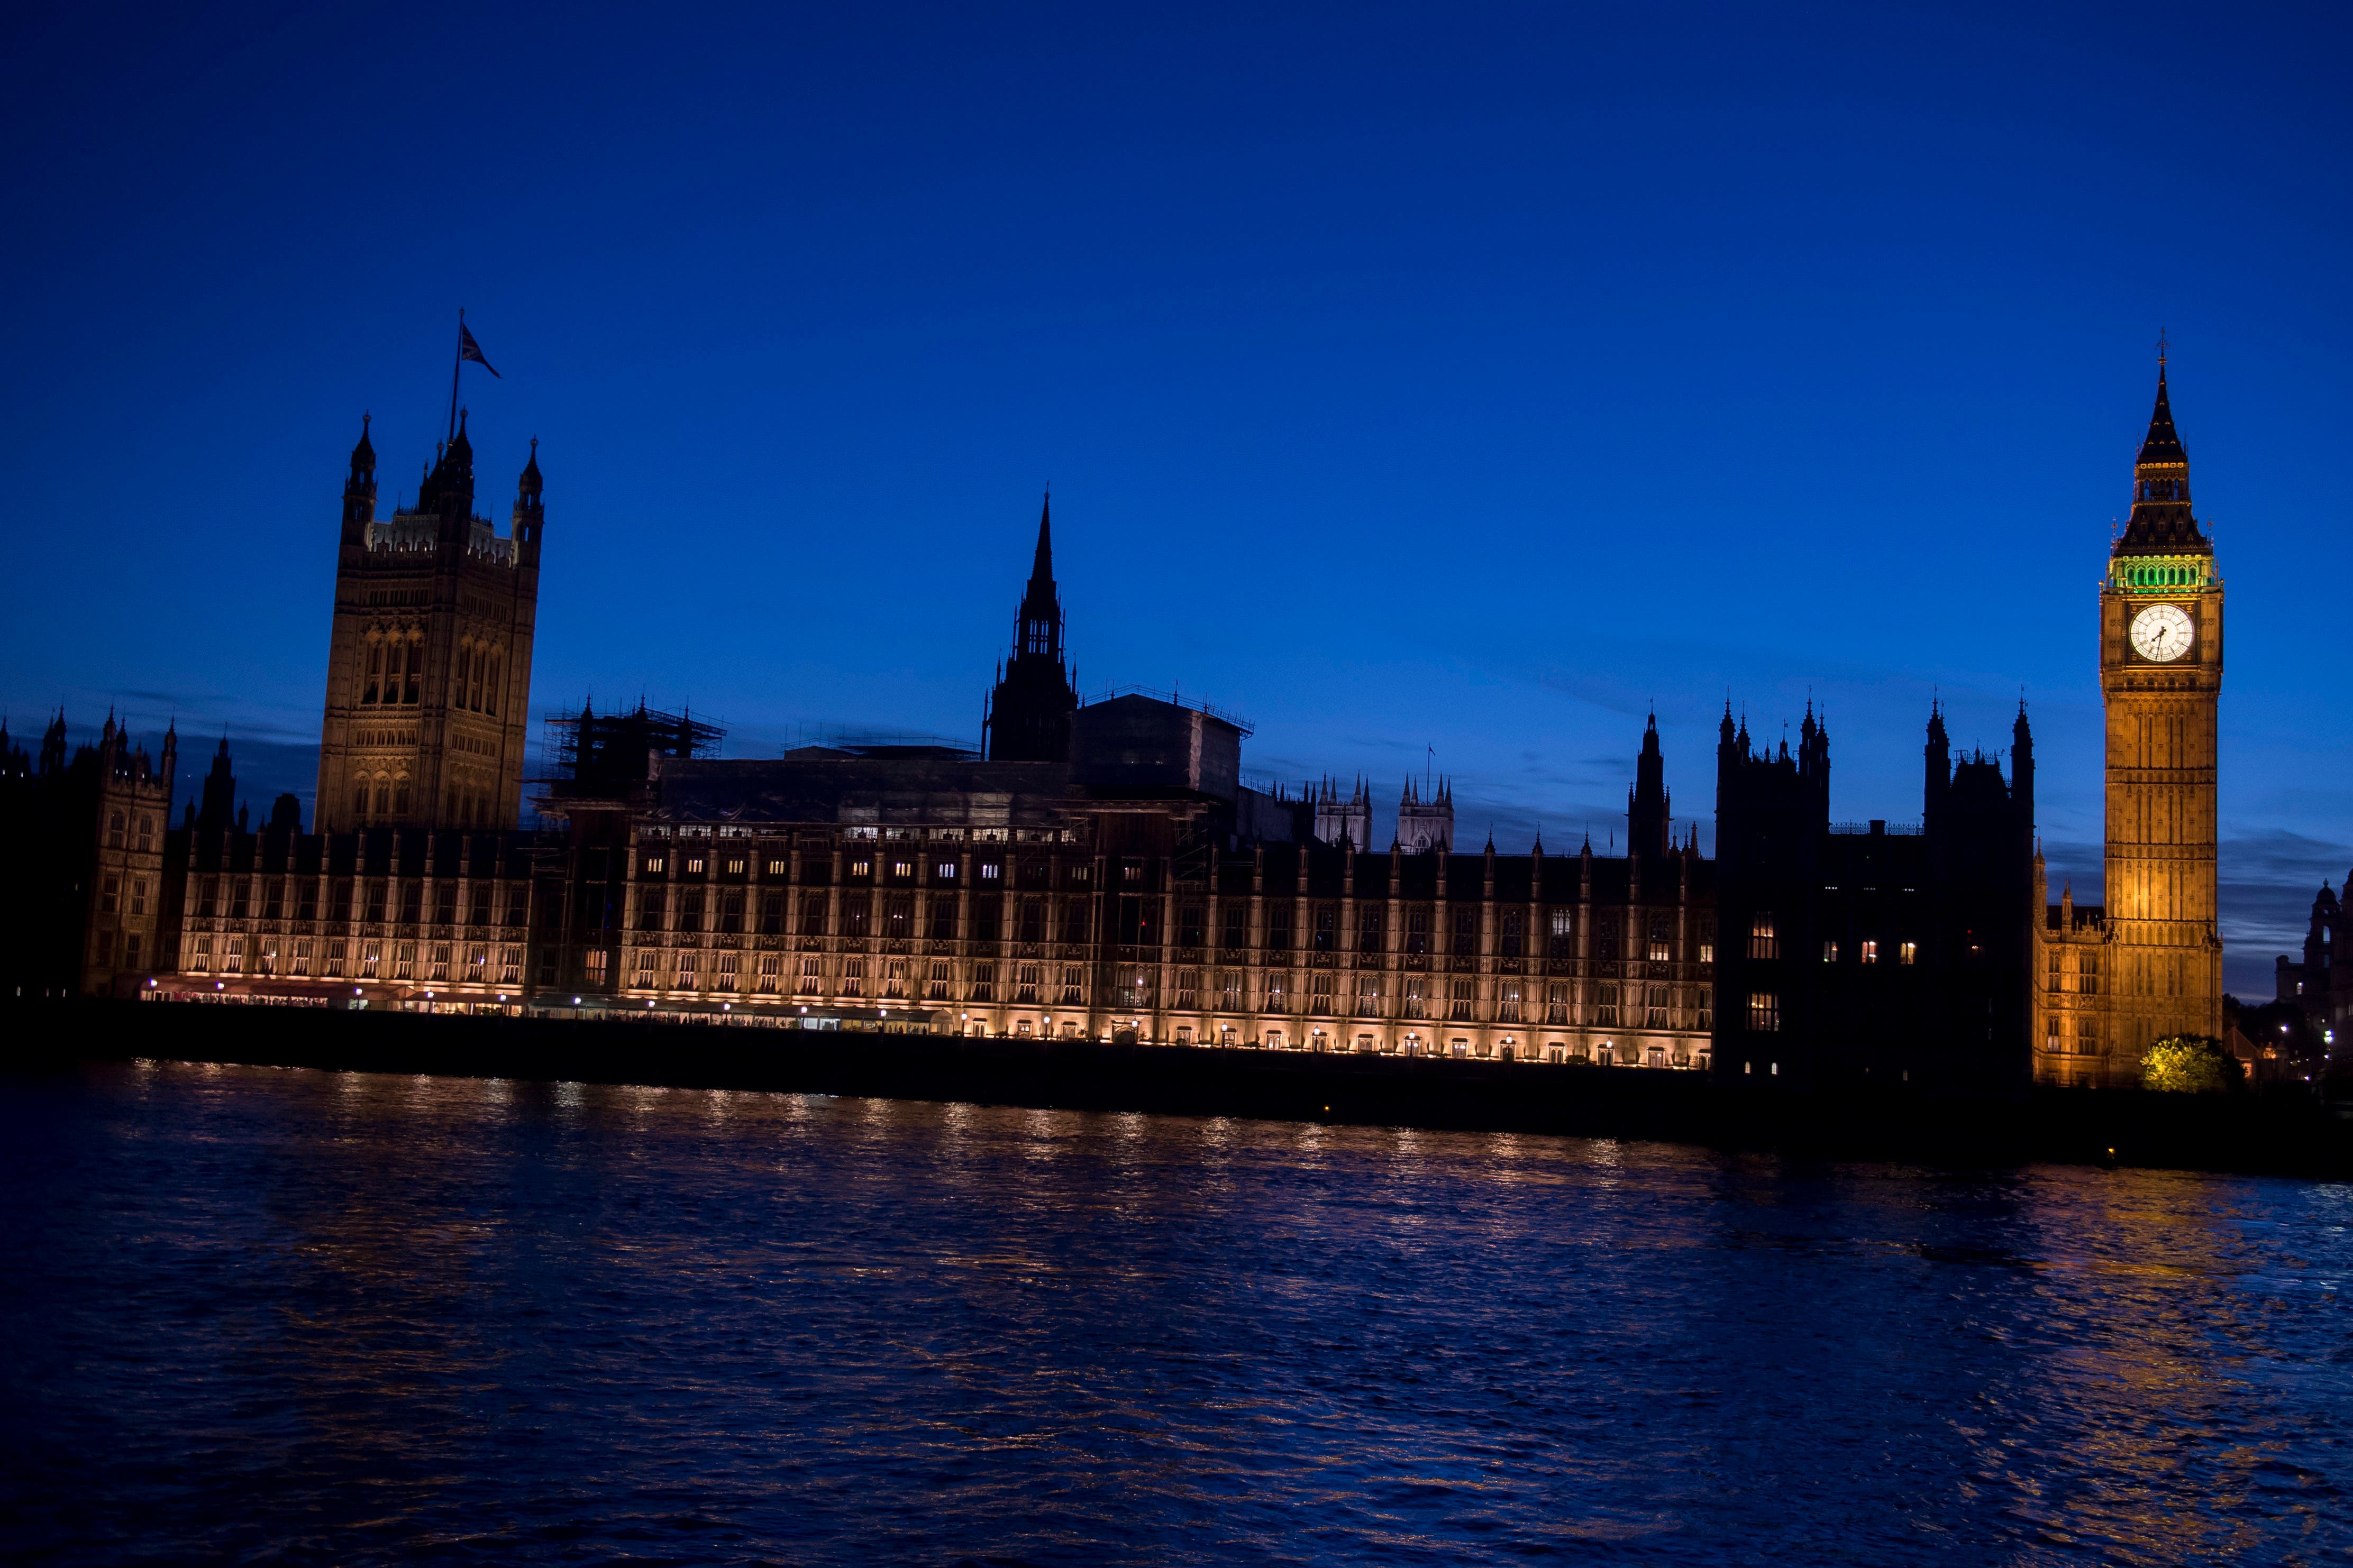 A general view of the Houses of Parliament